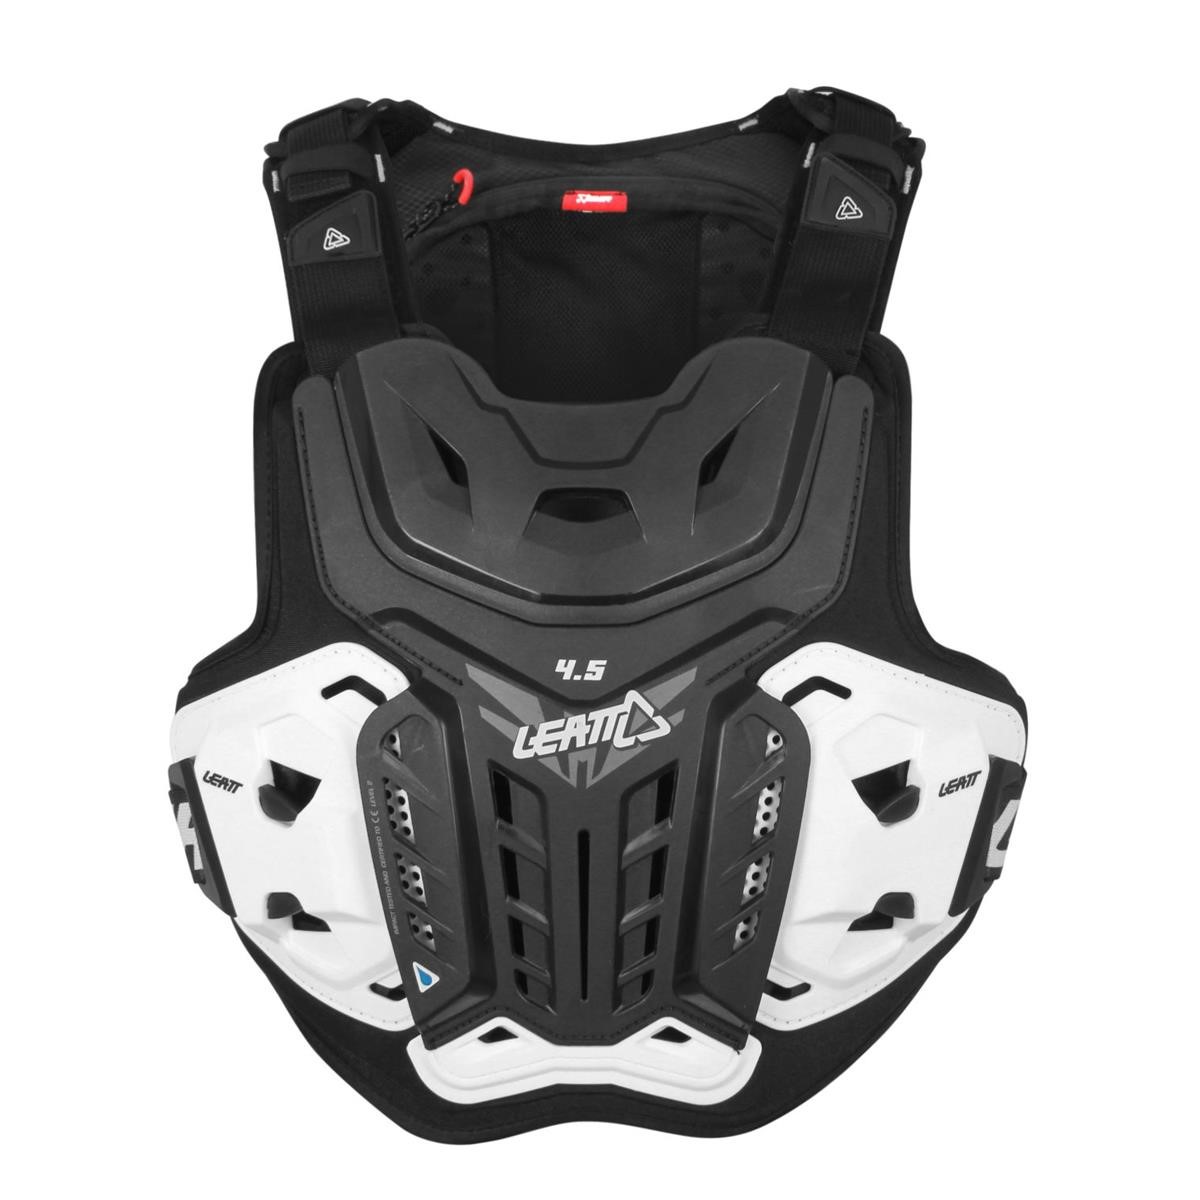 Leatt Chest Protector 4.5 Hydra inclusive Hydration Pack, Black/White